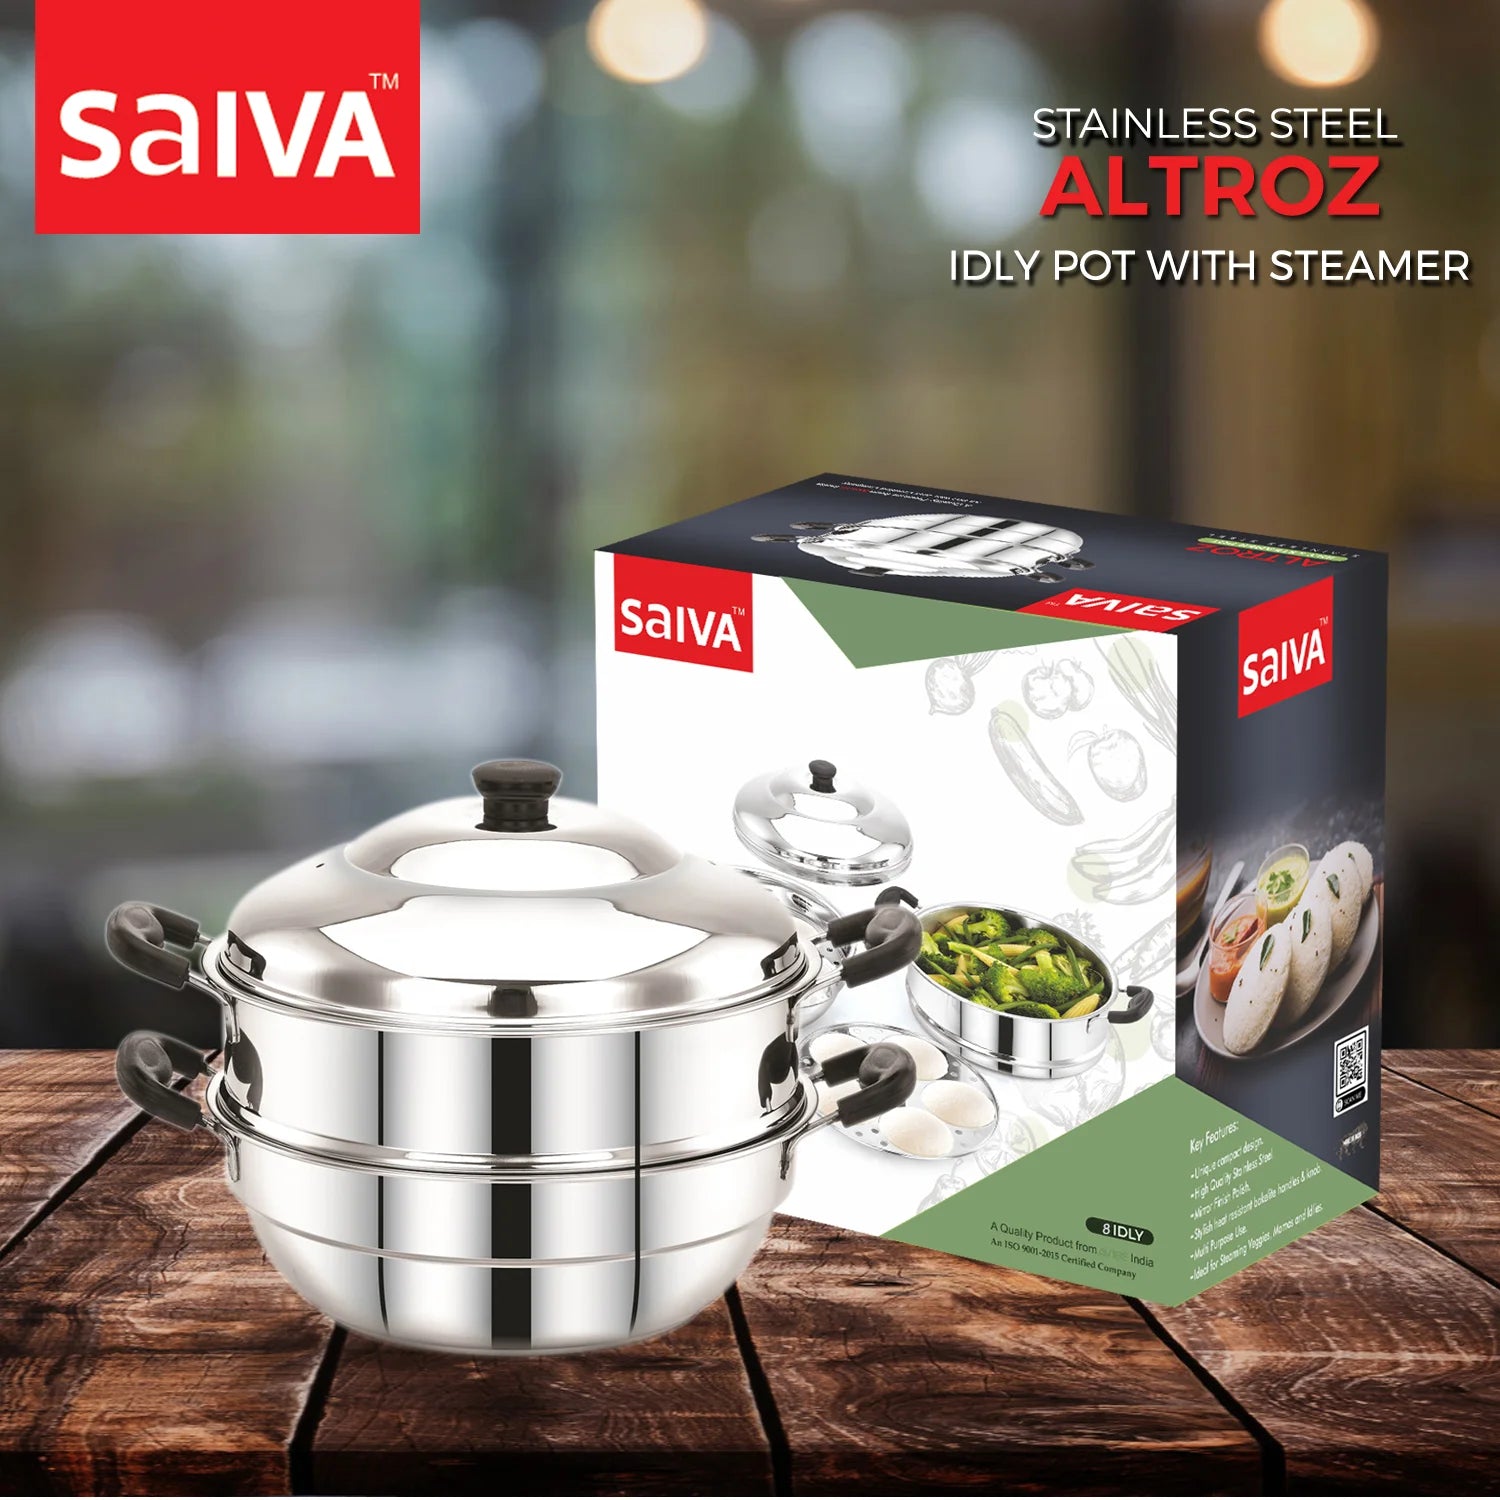 Avias Altroz stainless steel Idly pot with steamer | Idly cooker package